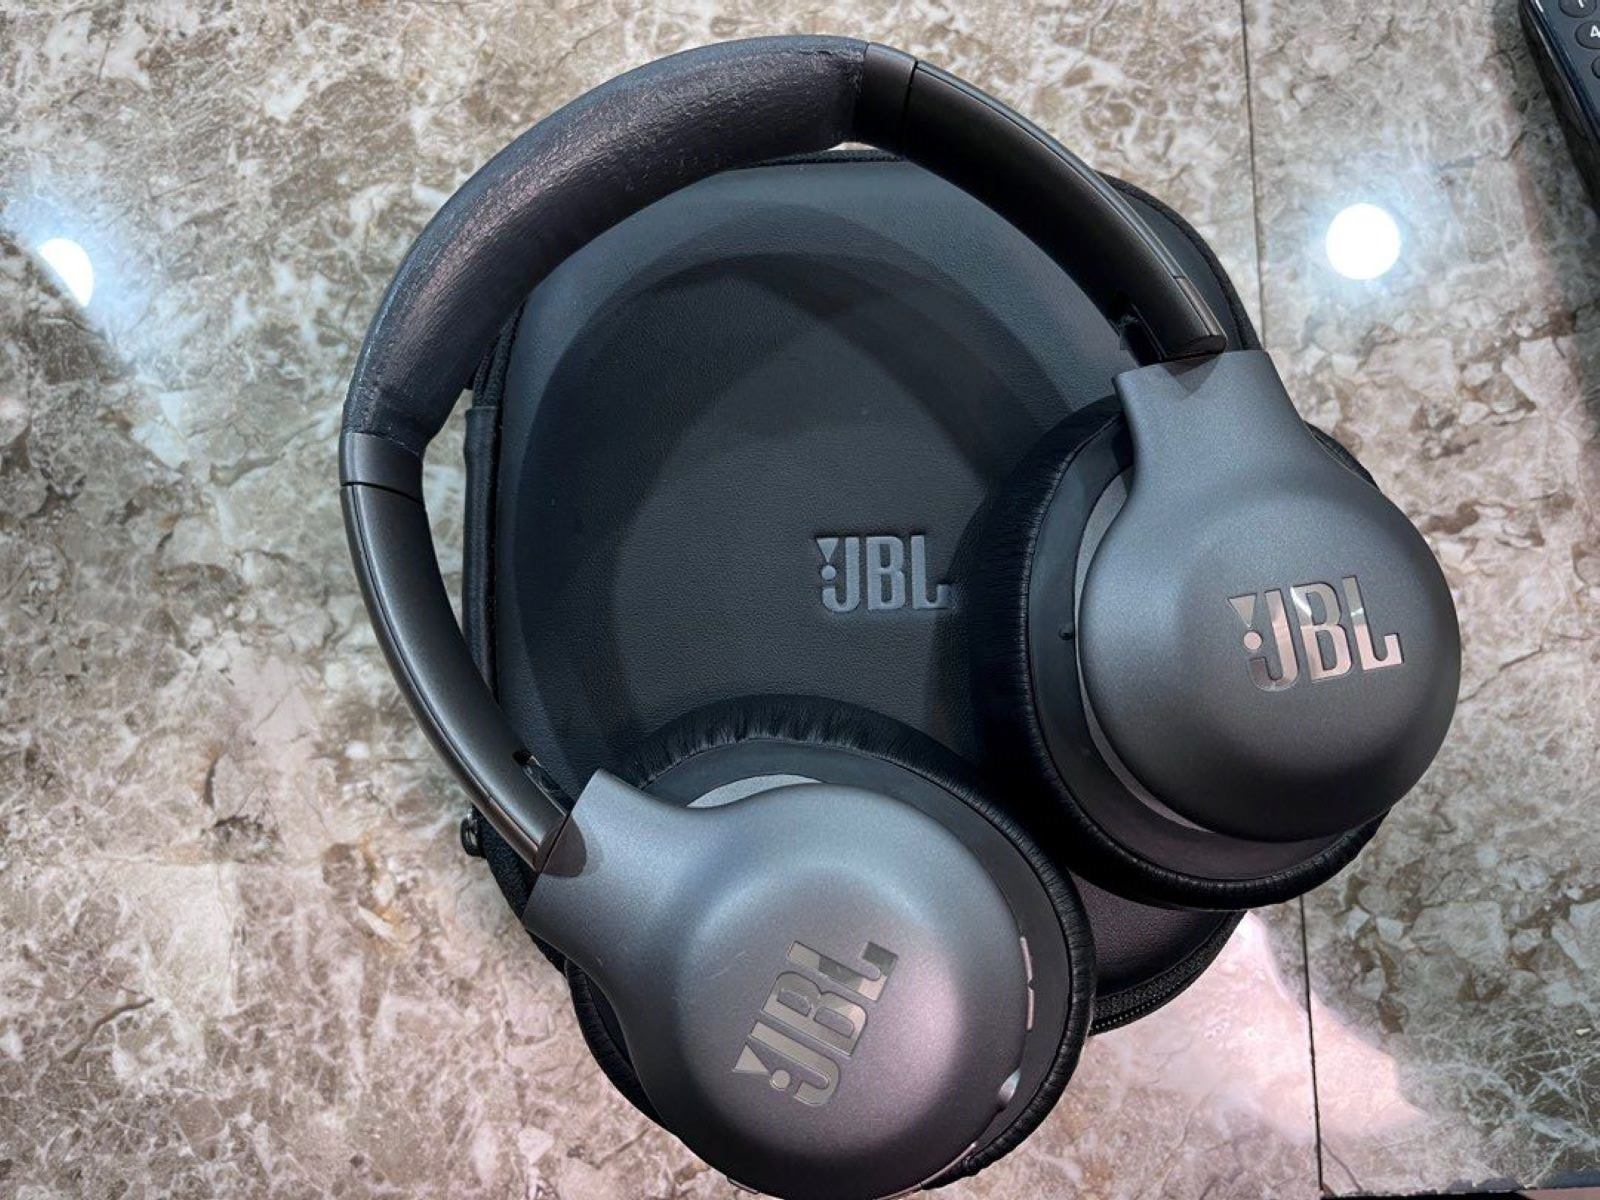 How To Pair JBL Headphones (Step-By-Step Instructions)